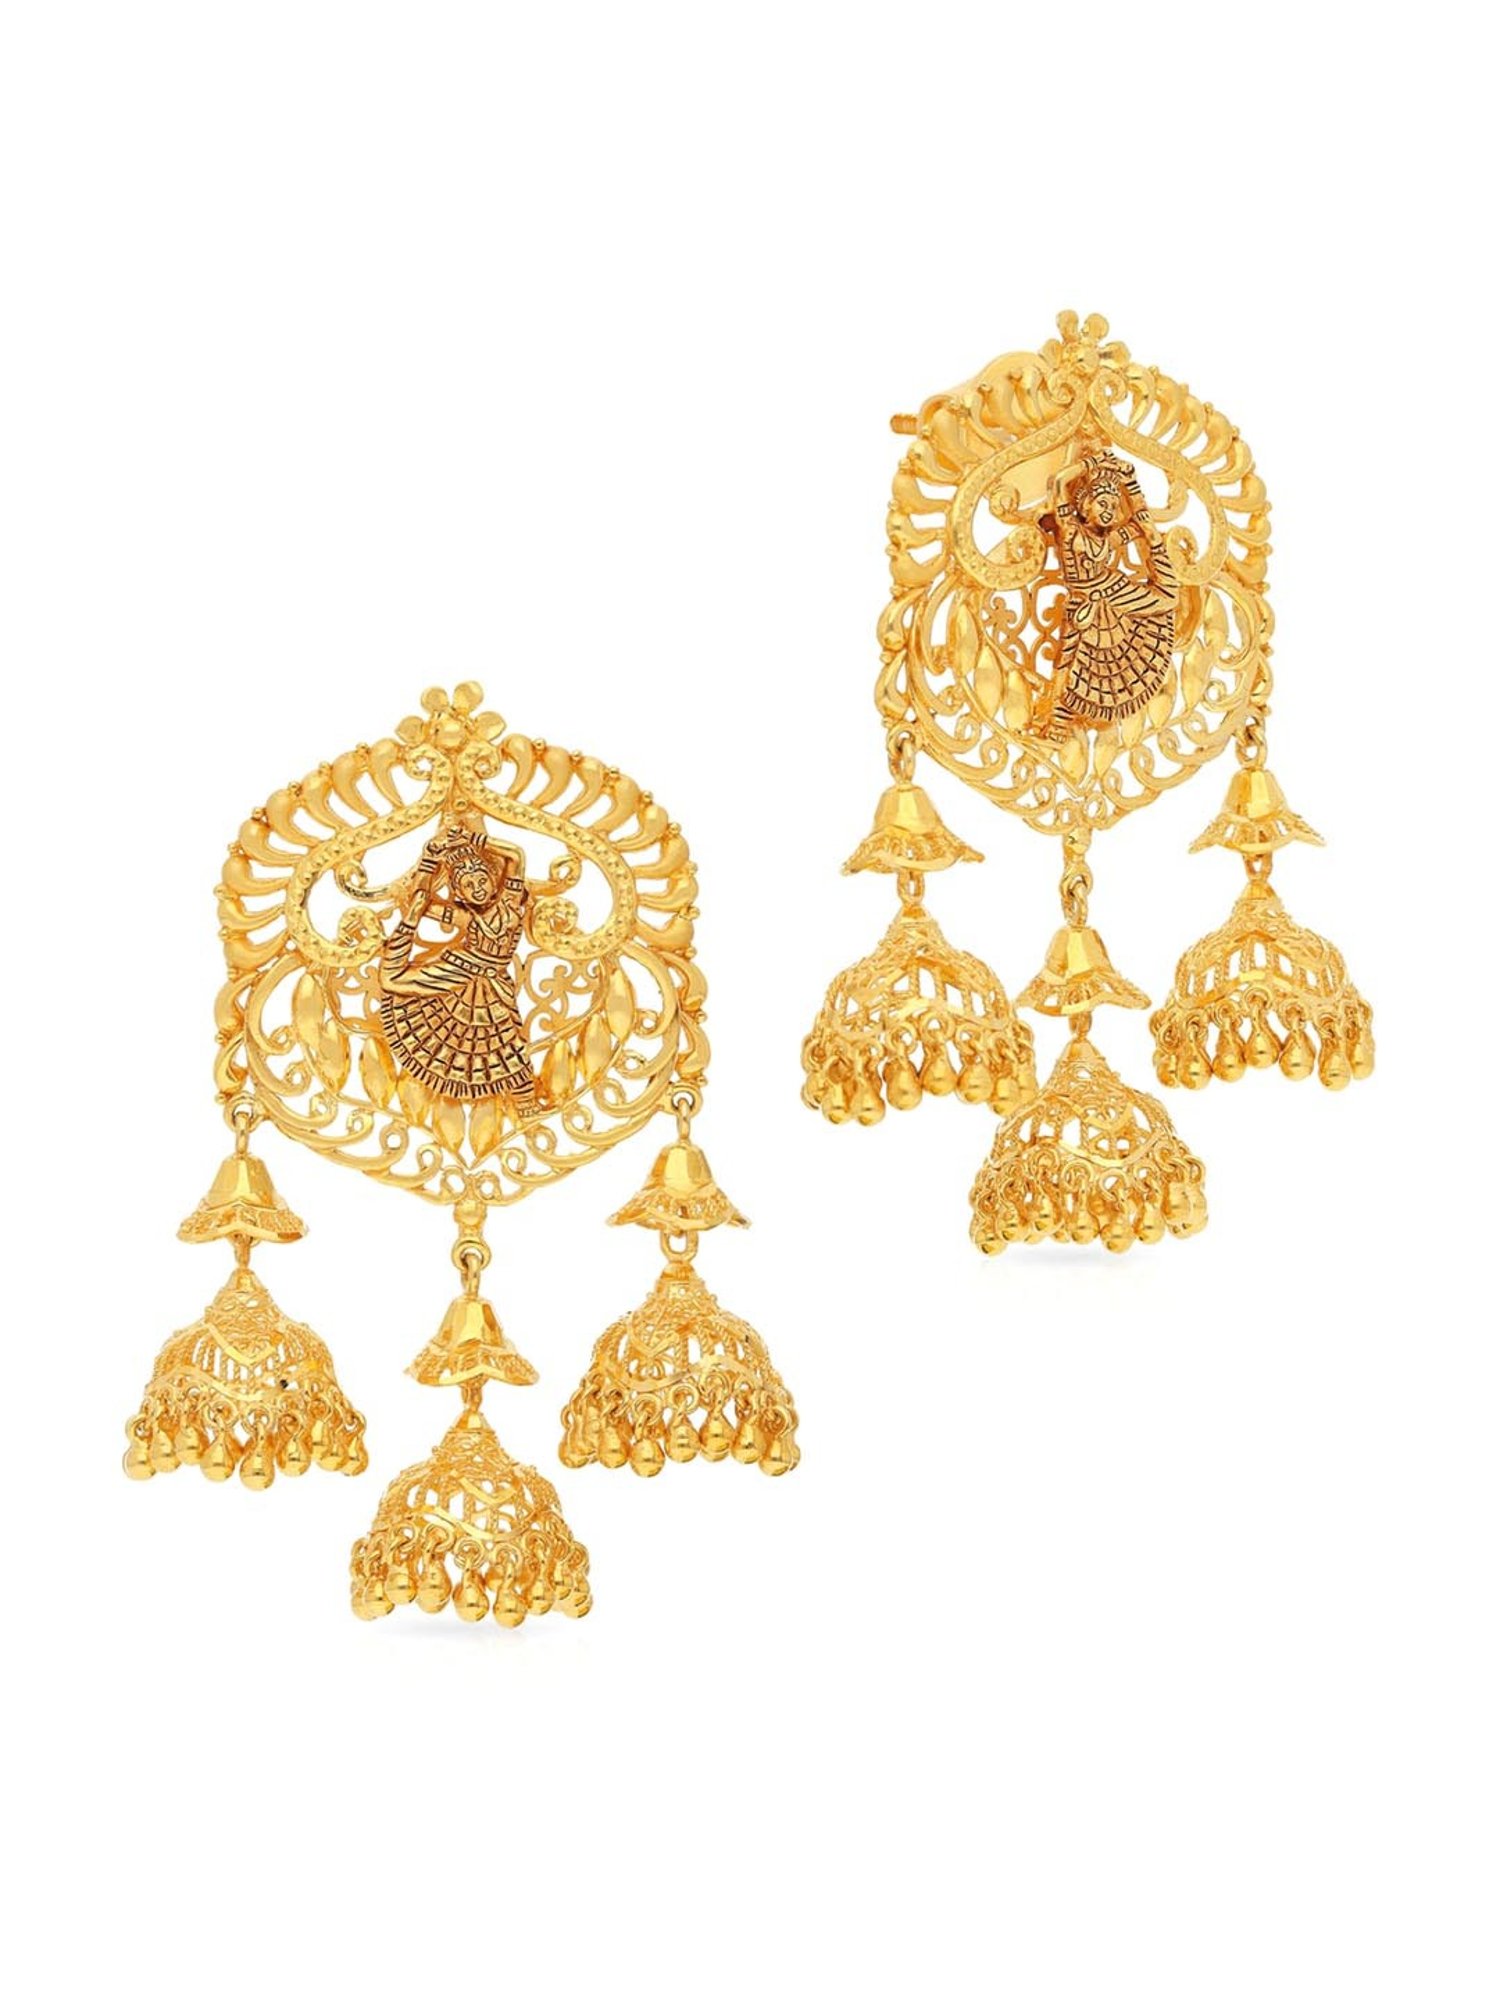 1st time ever Malabar gorgeous gold earring designs  Heavy gold earring  collections  Earrings  YouTube